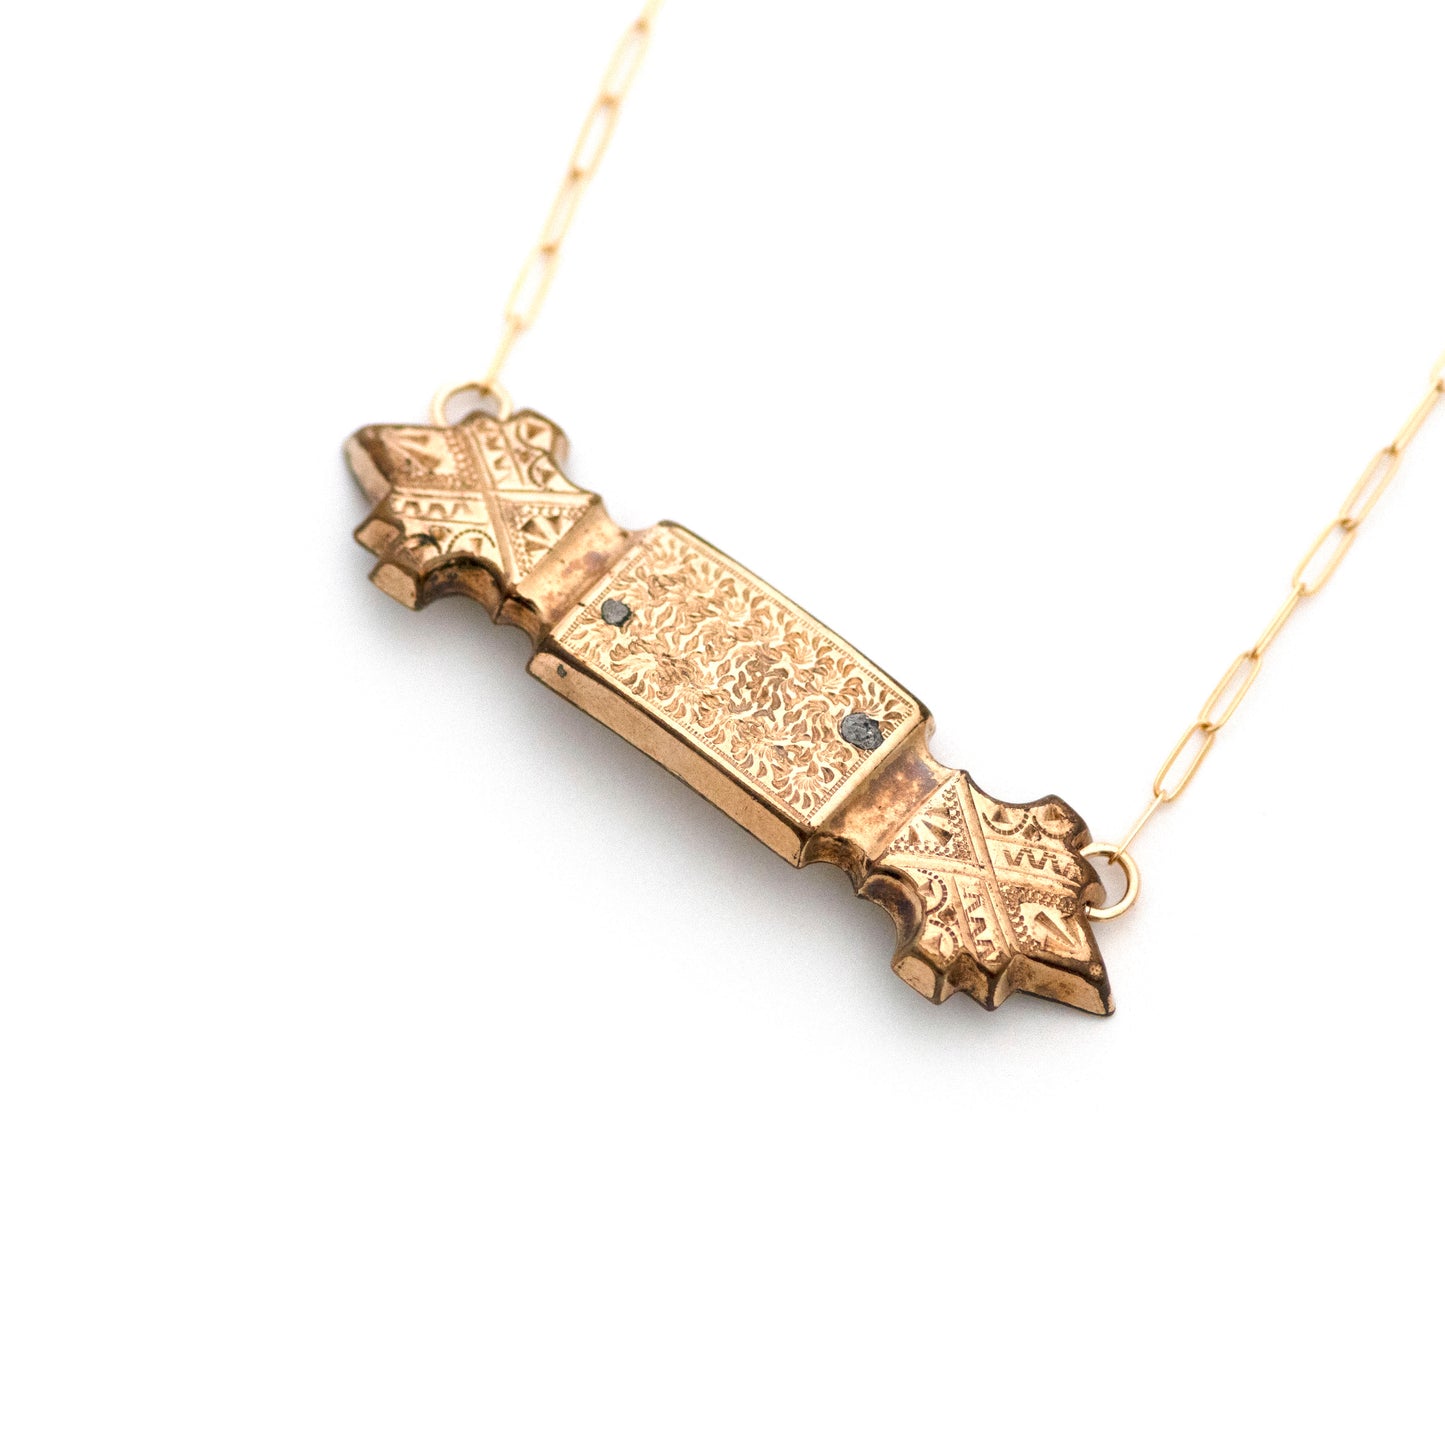 Gold filled Victorian bar pin pendant from the late 1800s with hand tooled details. Bar pendant has a mild convex curve from the front. Two solder marks are indications of a life well lived.